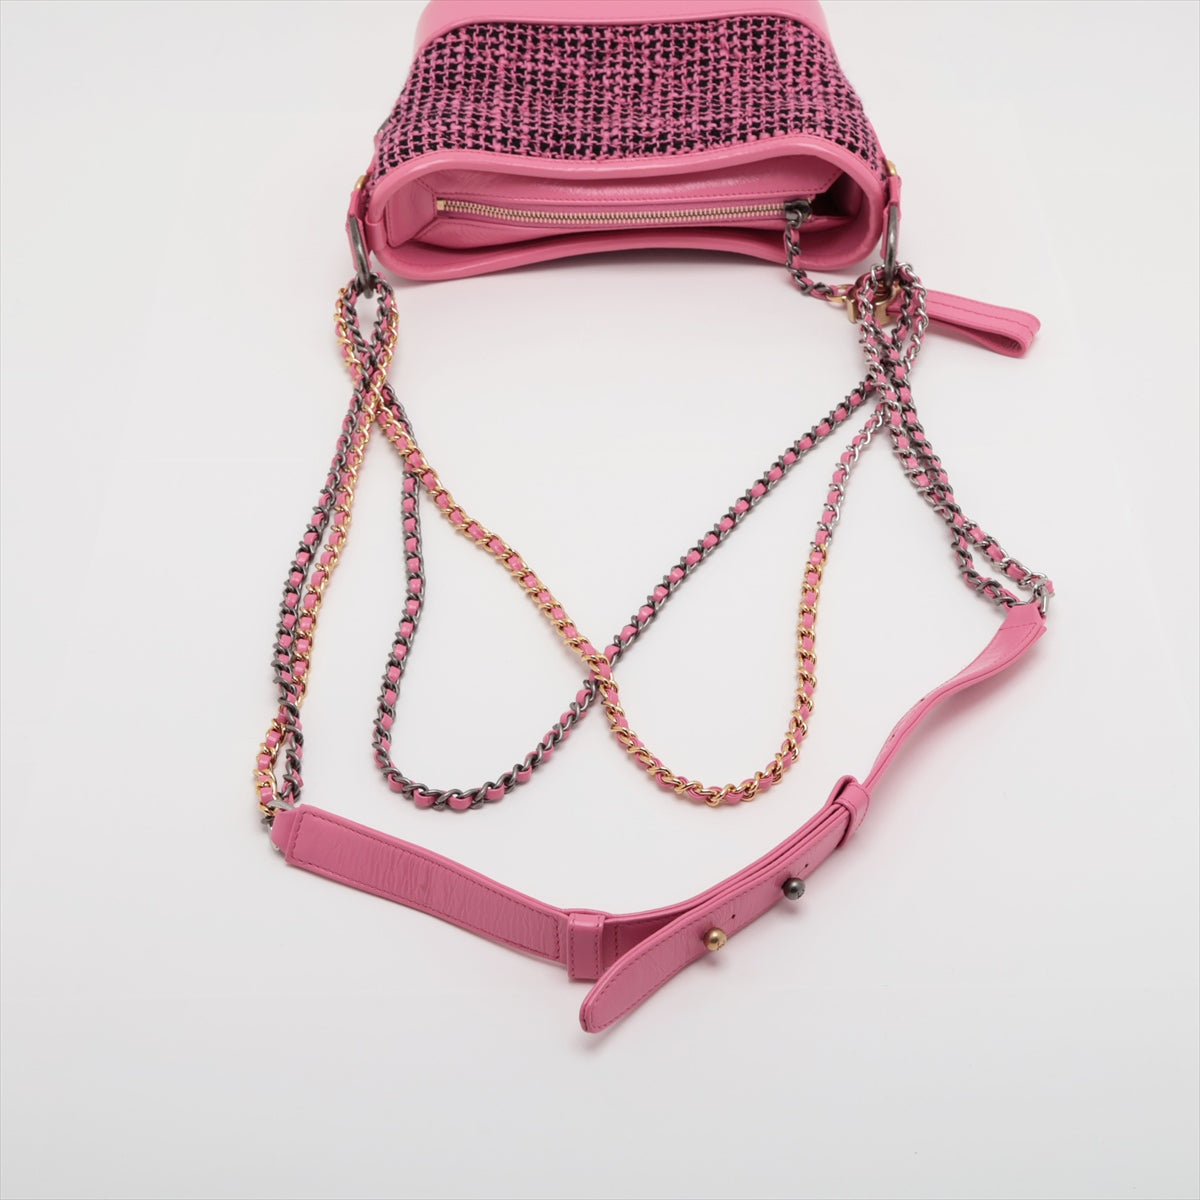 Chanel Gabrielle Doo Chanel Tweed Chain shoulder bag Pink Gold x silver metal fittings 28th